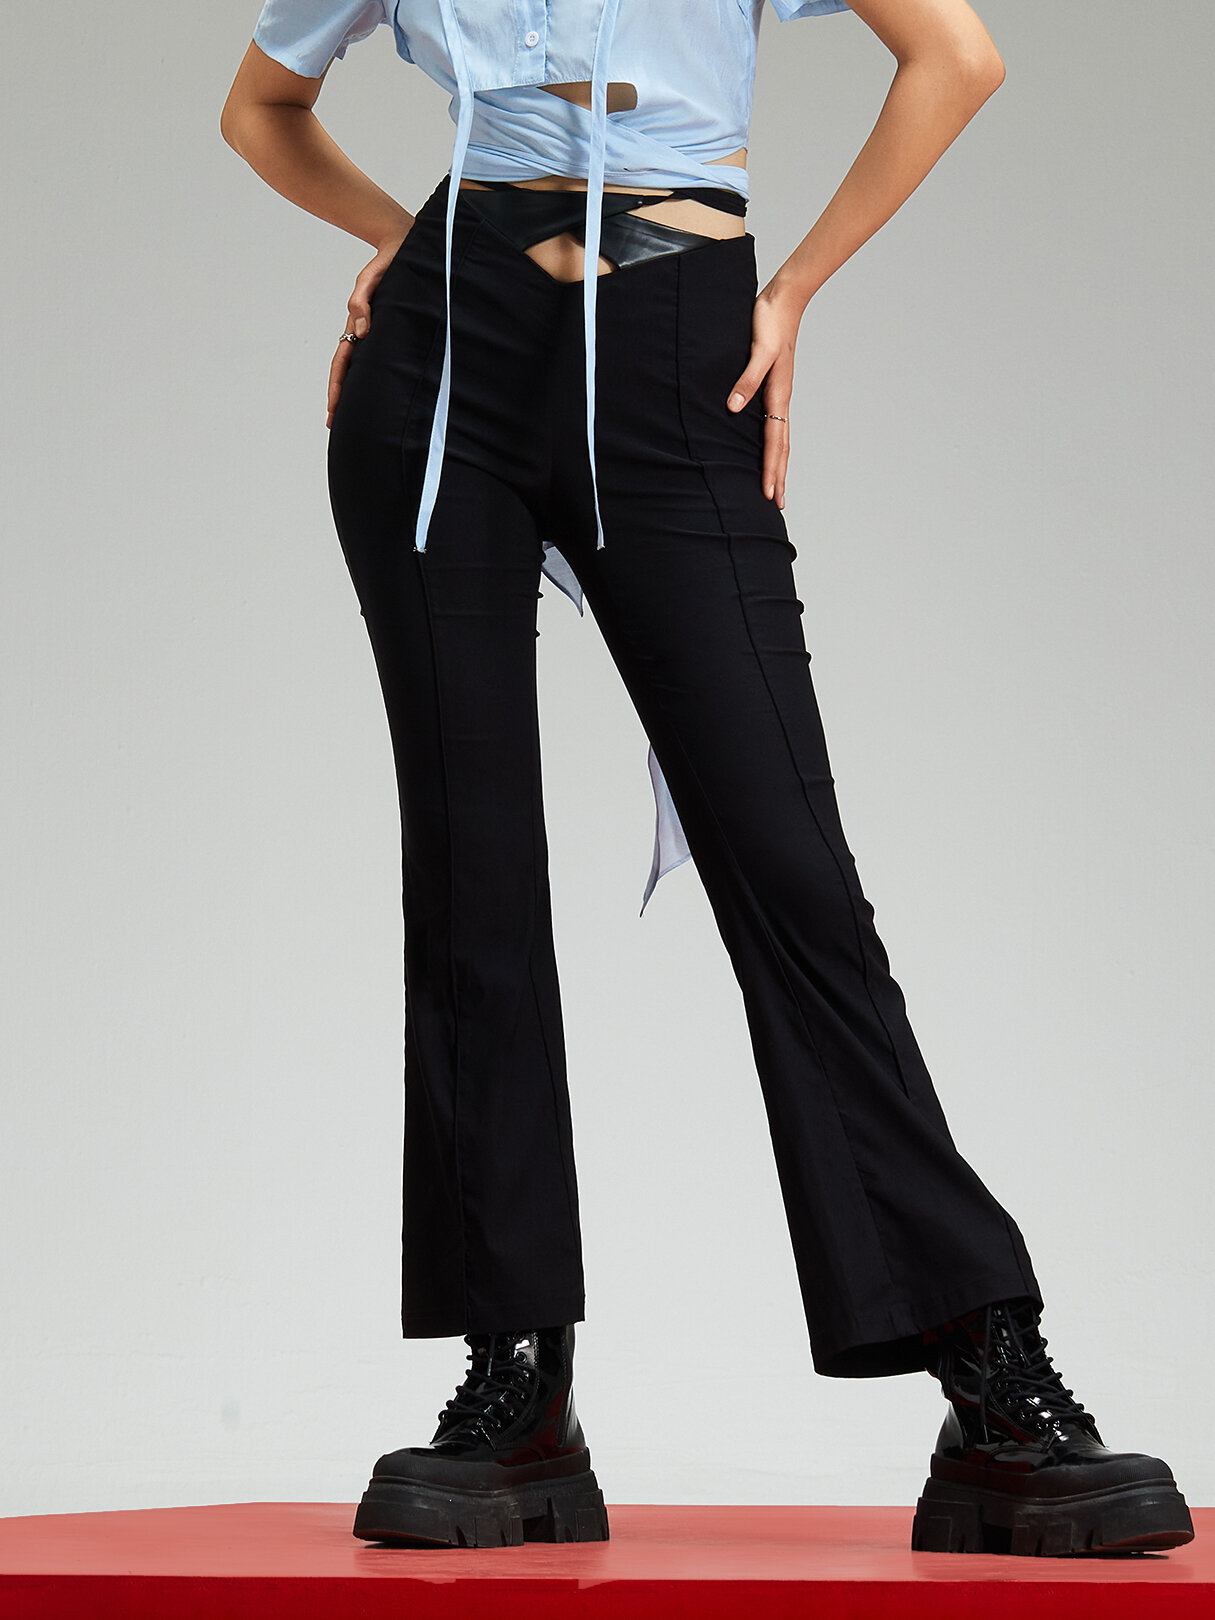 Solid Cut Out Lace Up Invisible Zip Flare Leg Pants